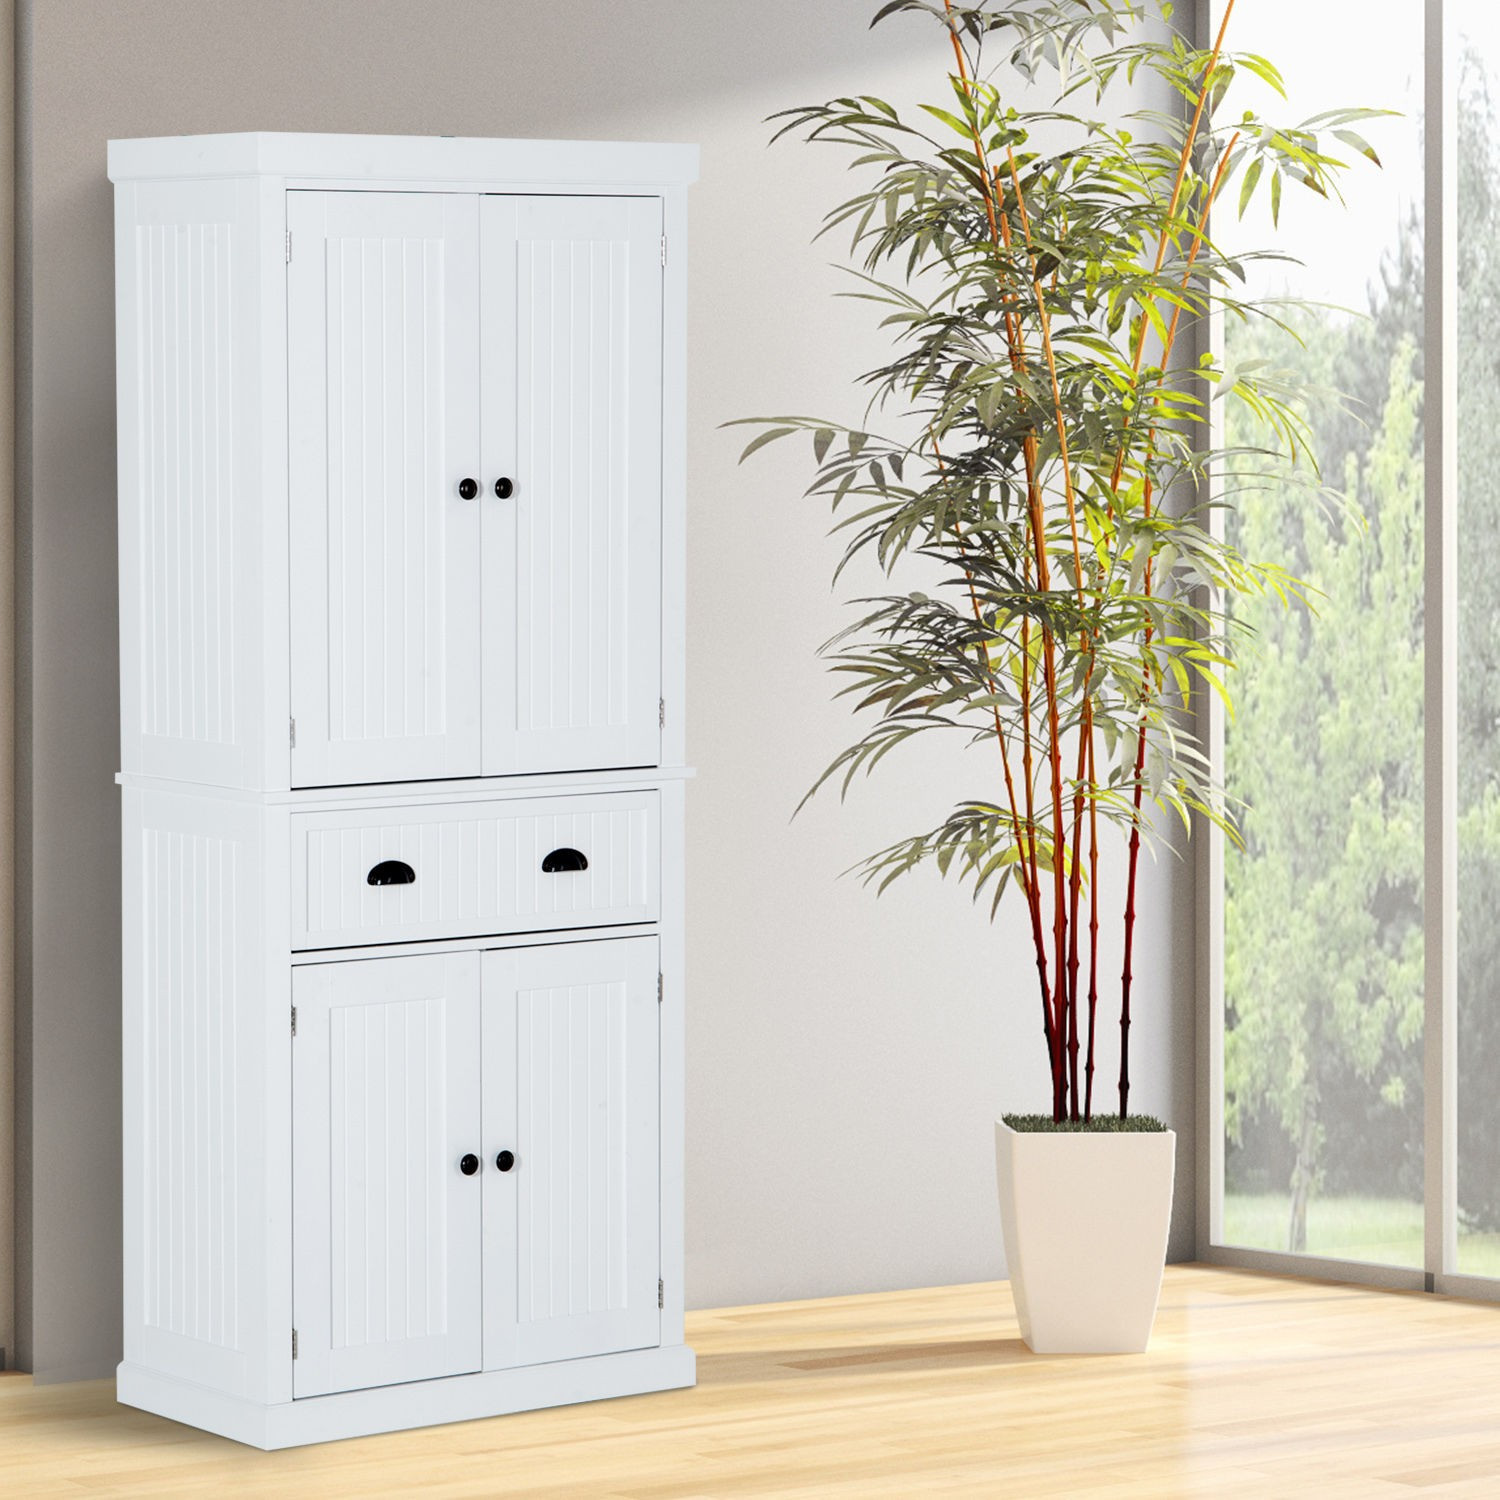 White Kitchen Pantry Freestanding
 Hom Free Standing Colonial Wood Storage Cabinet